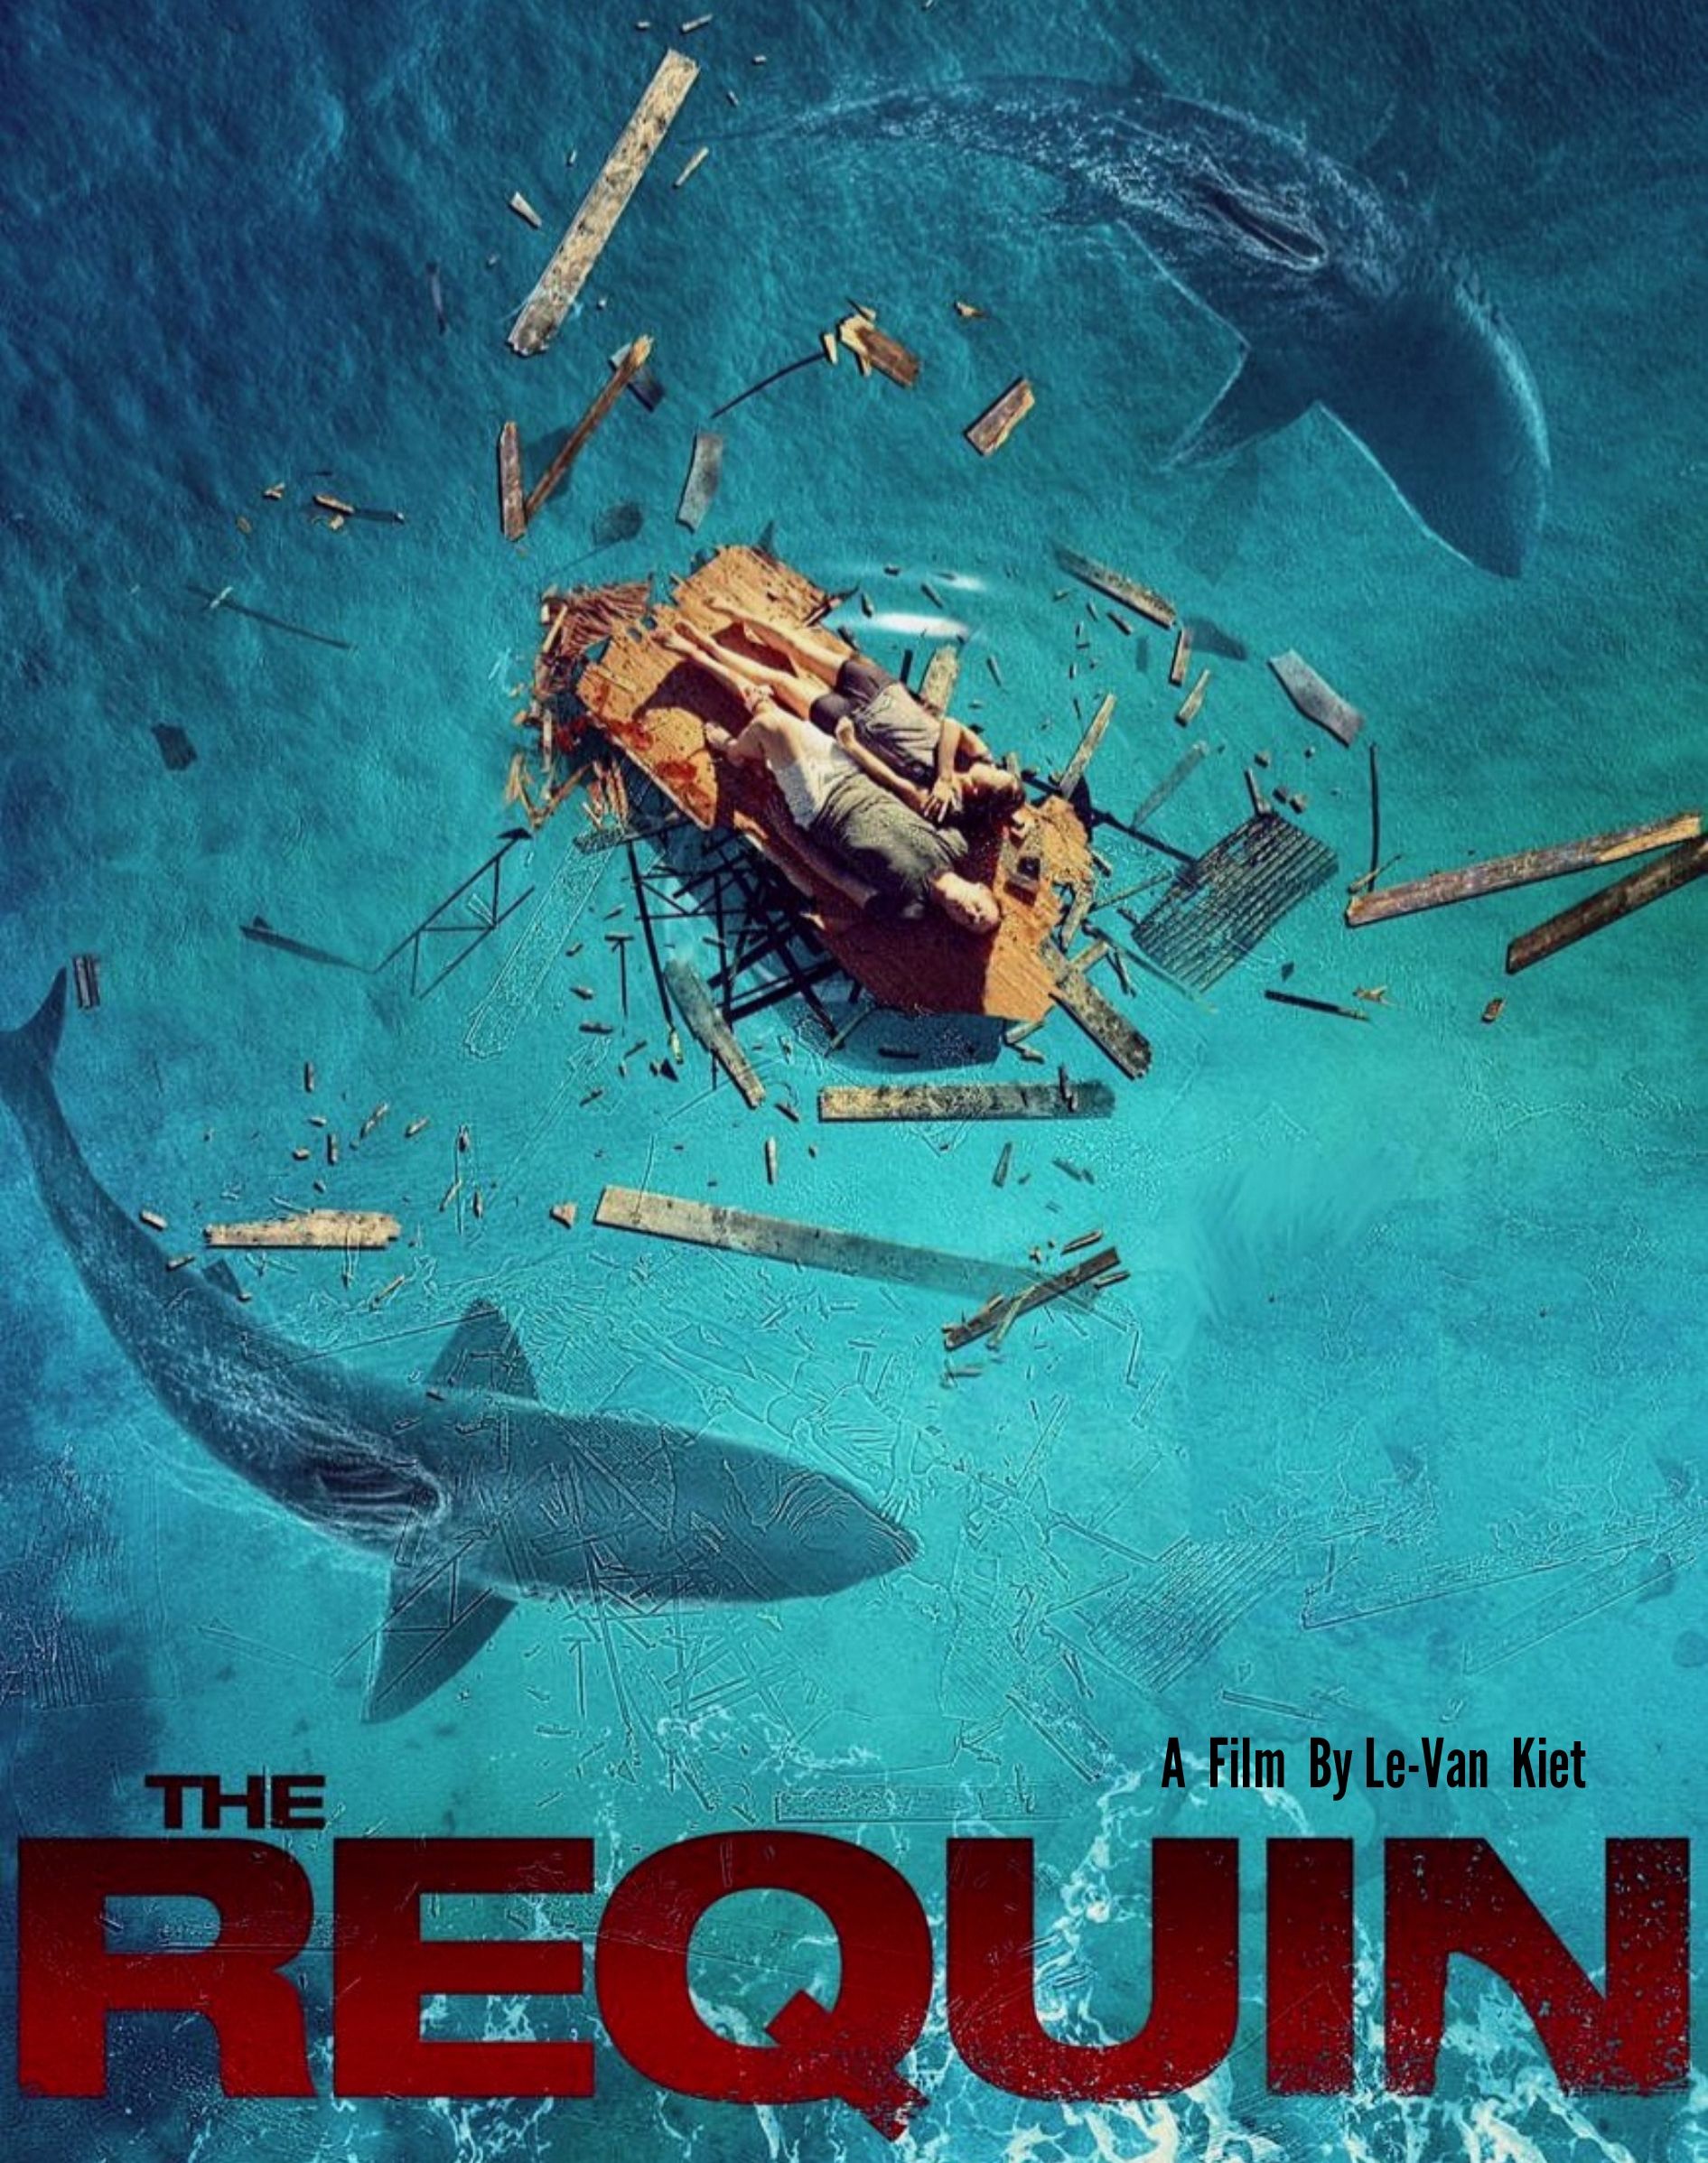 Where to watch “The Requin”